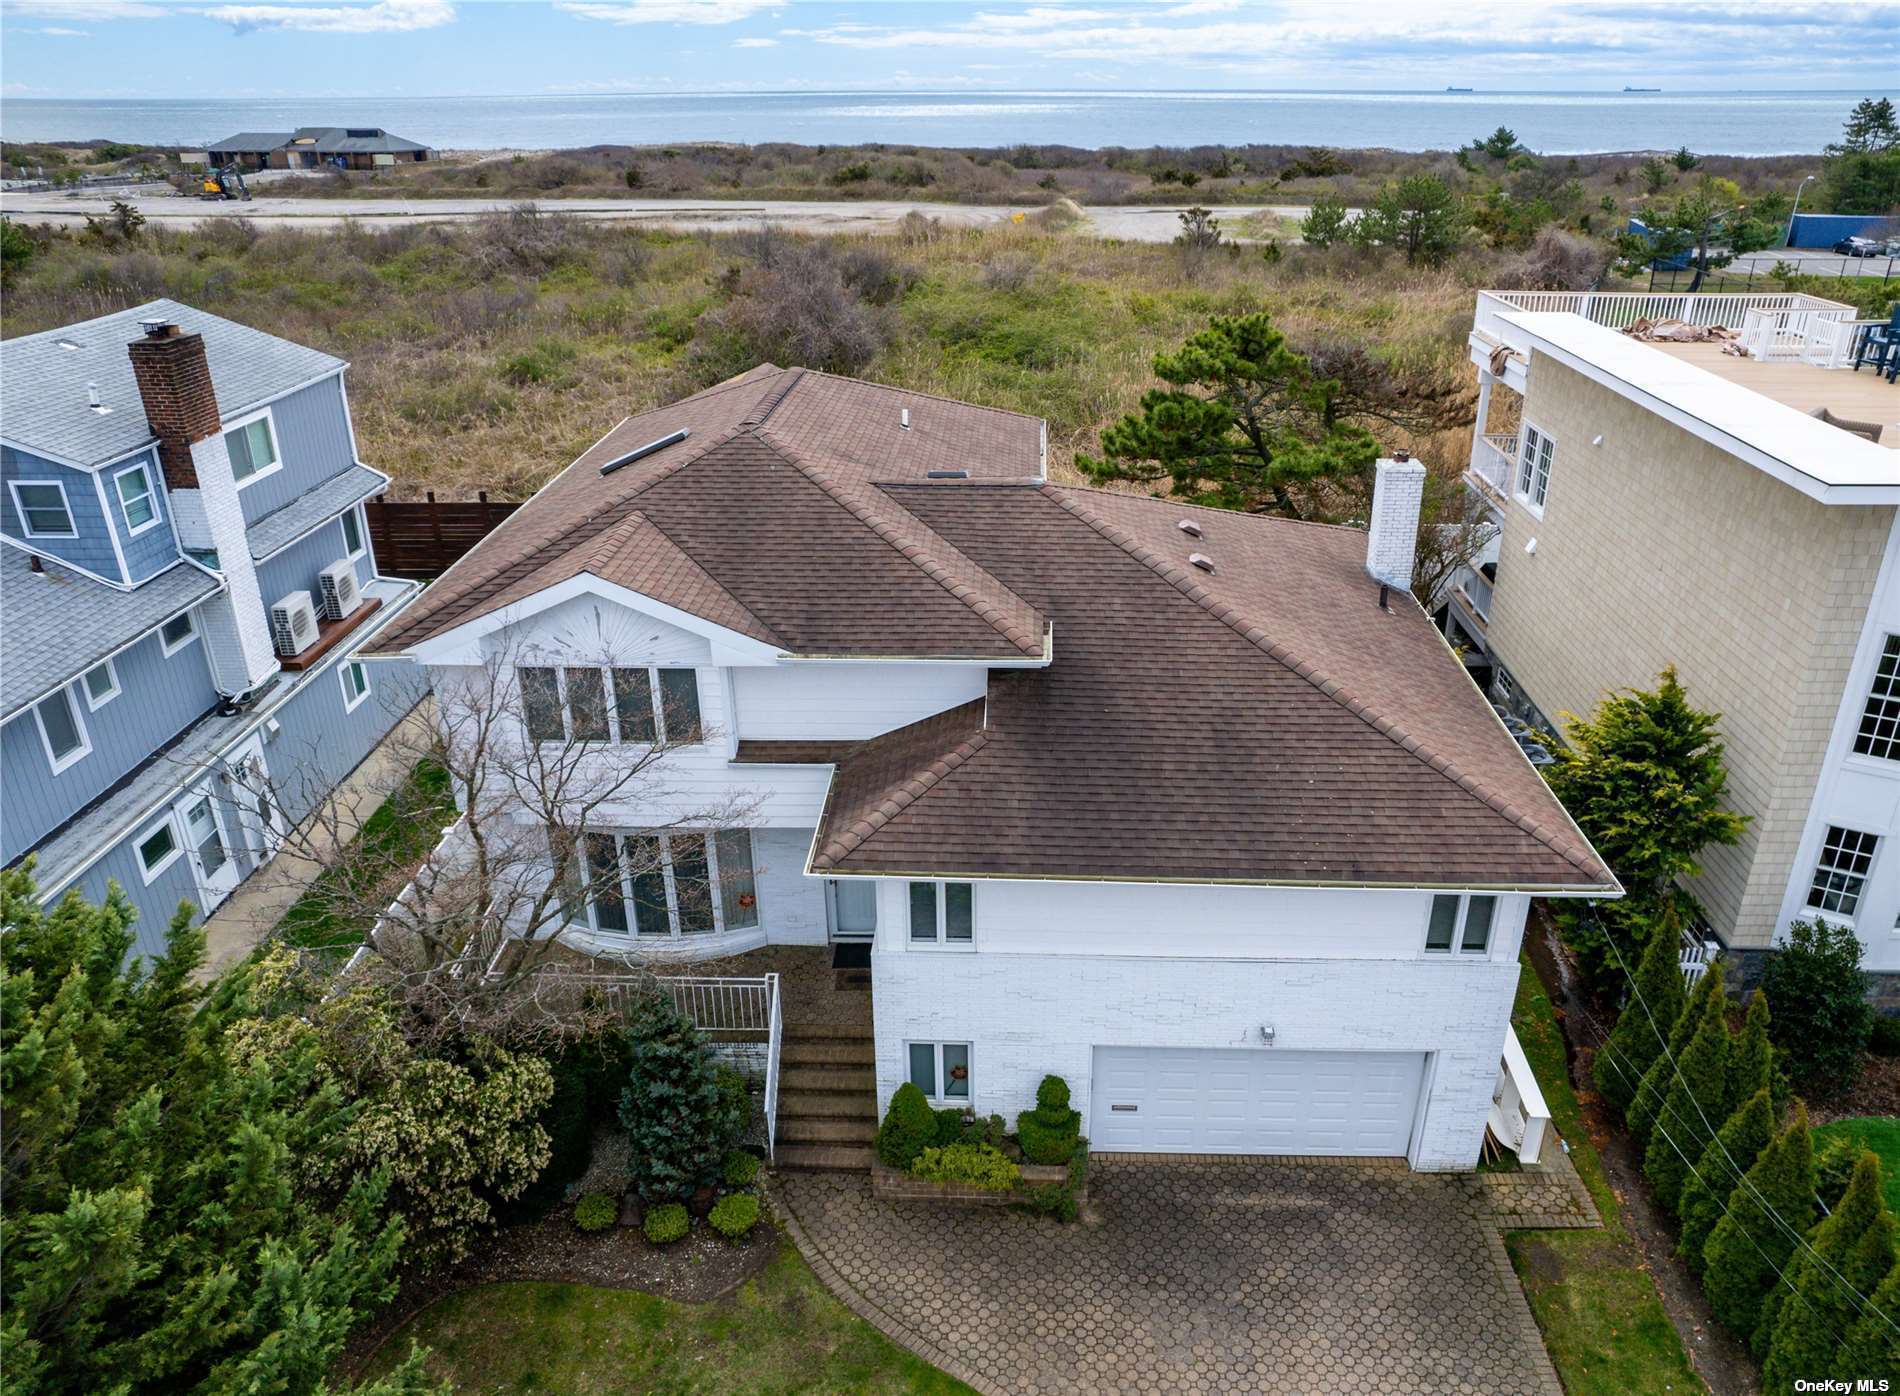 an aerial view of a house with a yard and ocean view